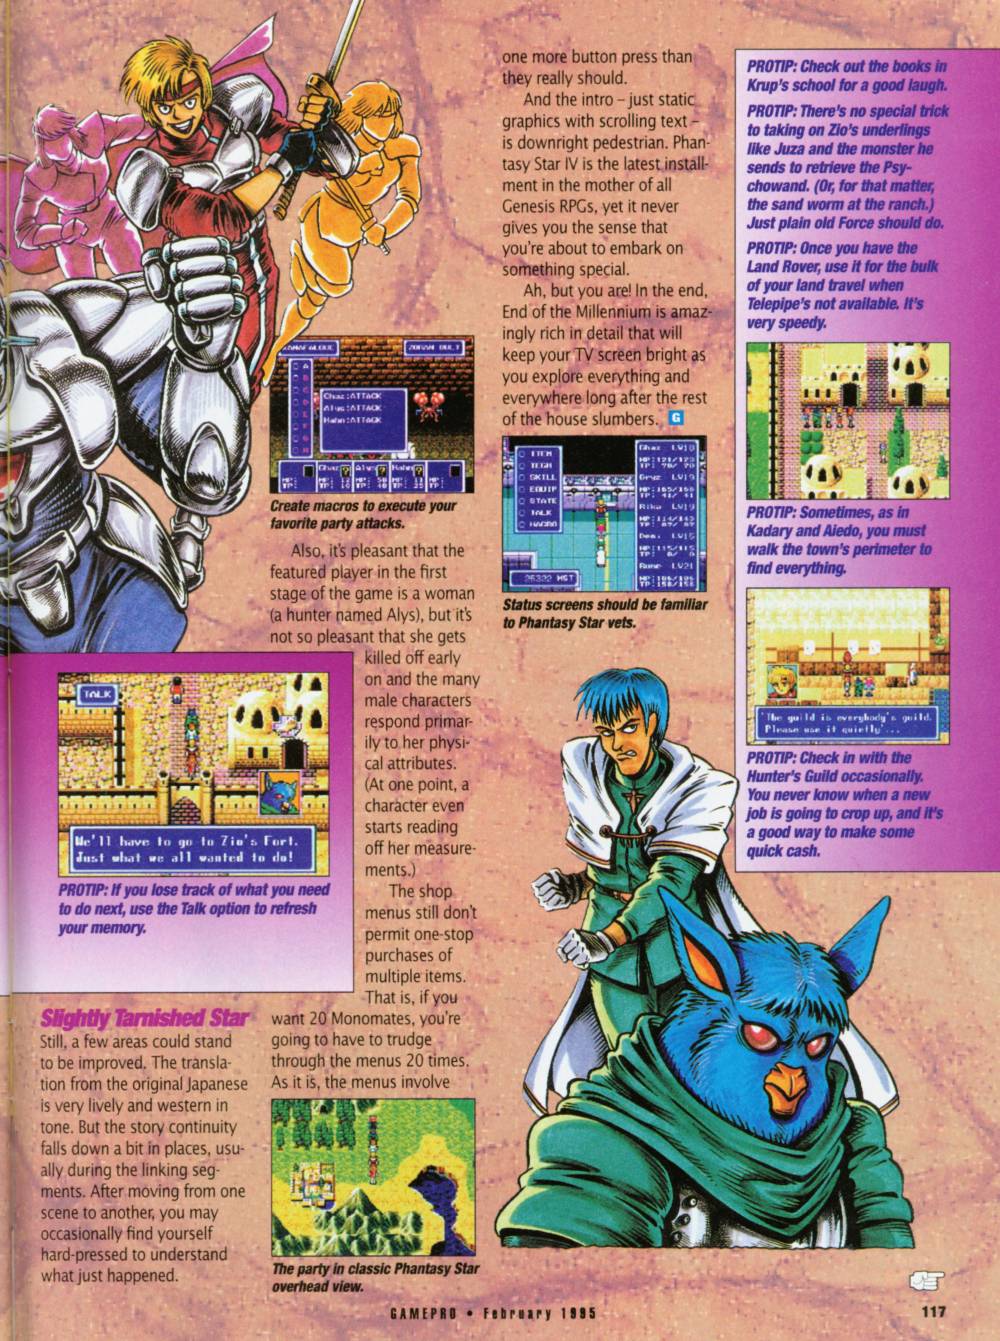 GamePro 67, Page 2